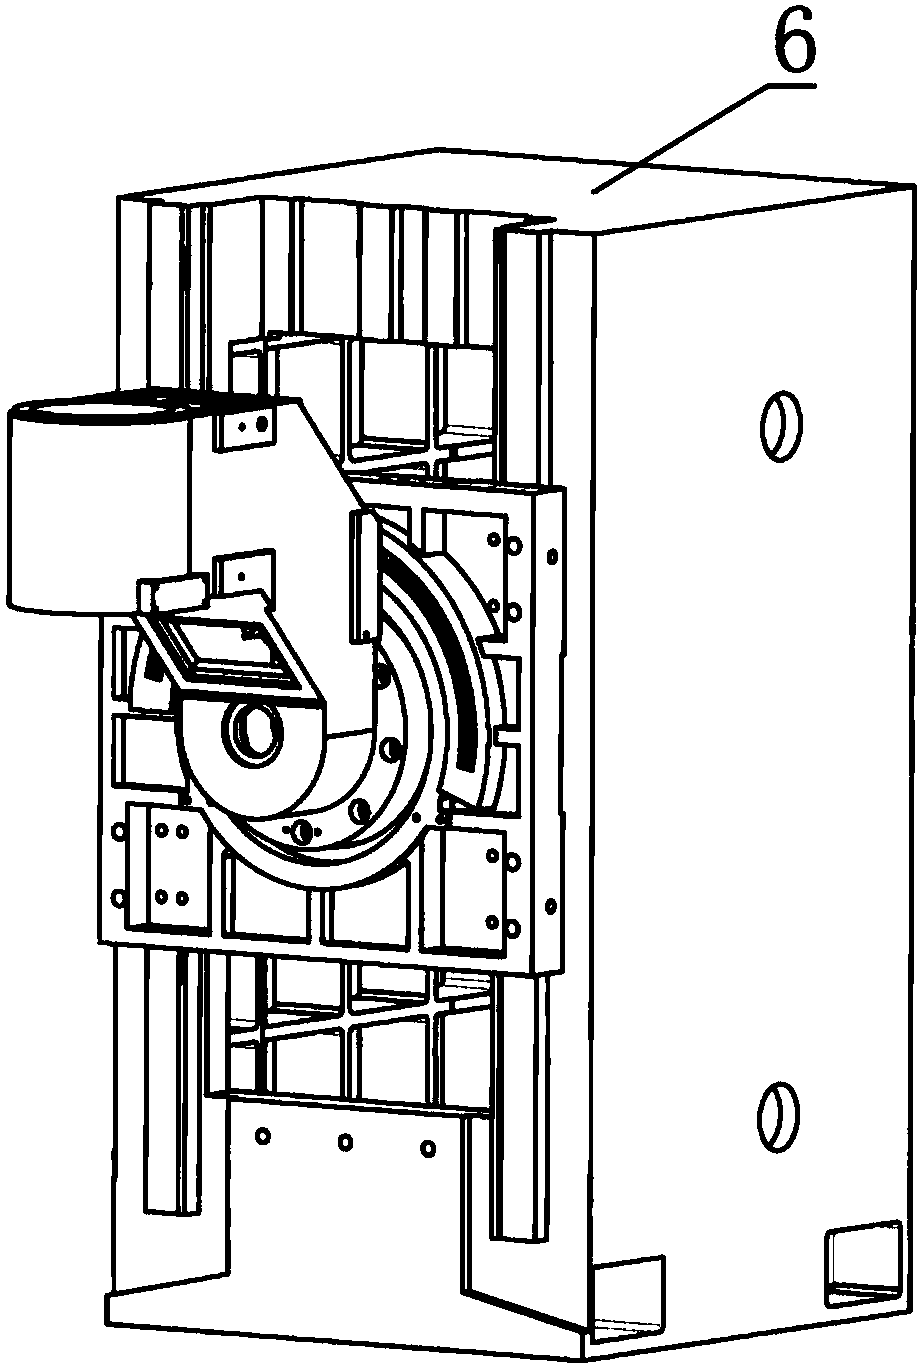 Numerical control milling machine spindle box structure